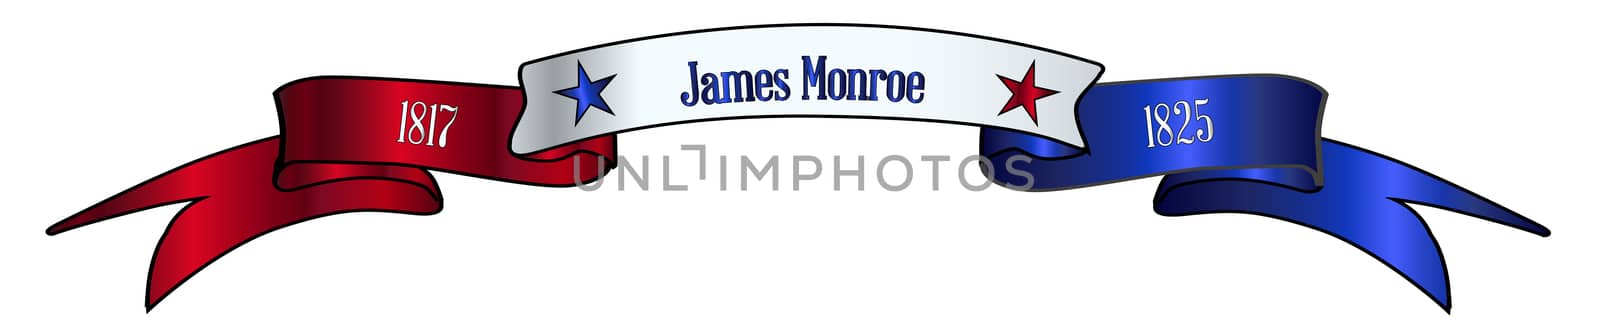 A red white and blue satin or silk ribbon banner with the text James Monroe and stars and date in office